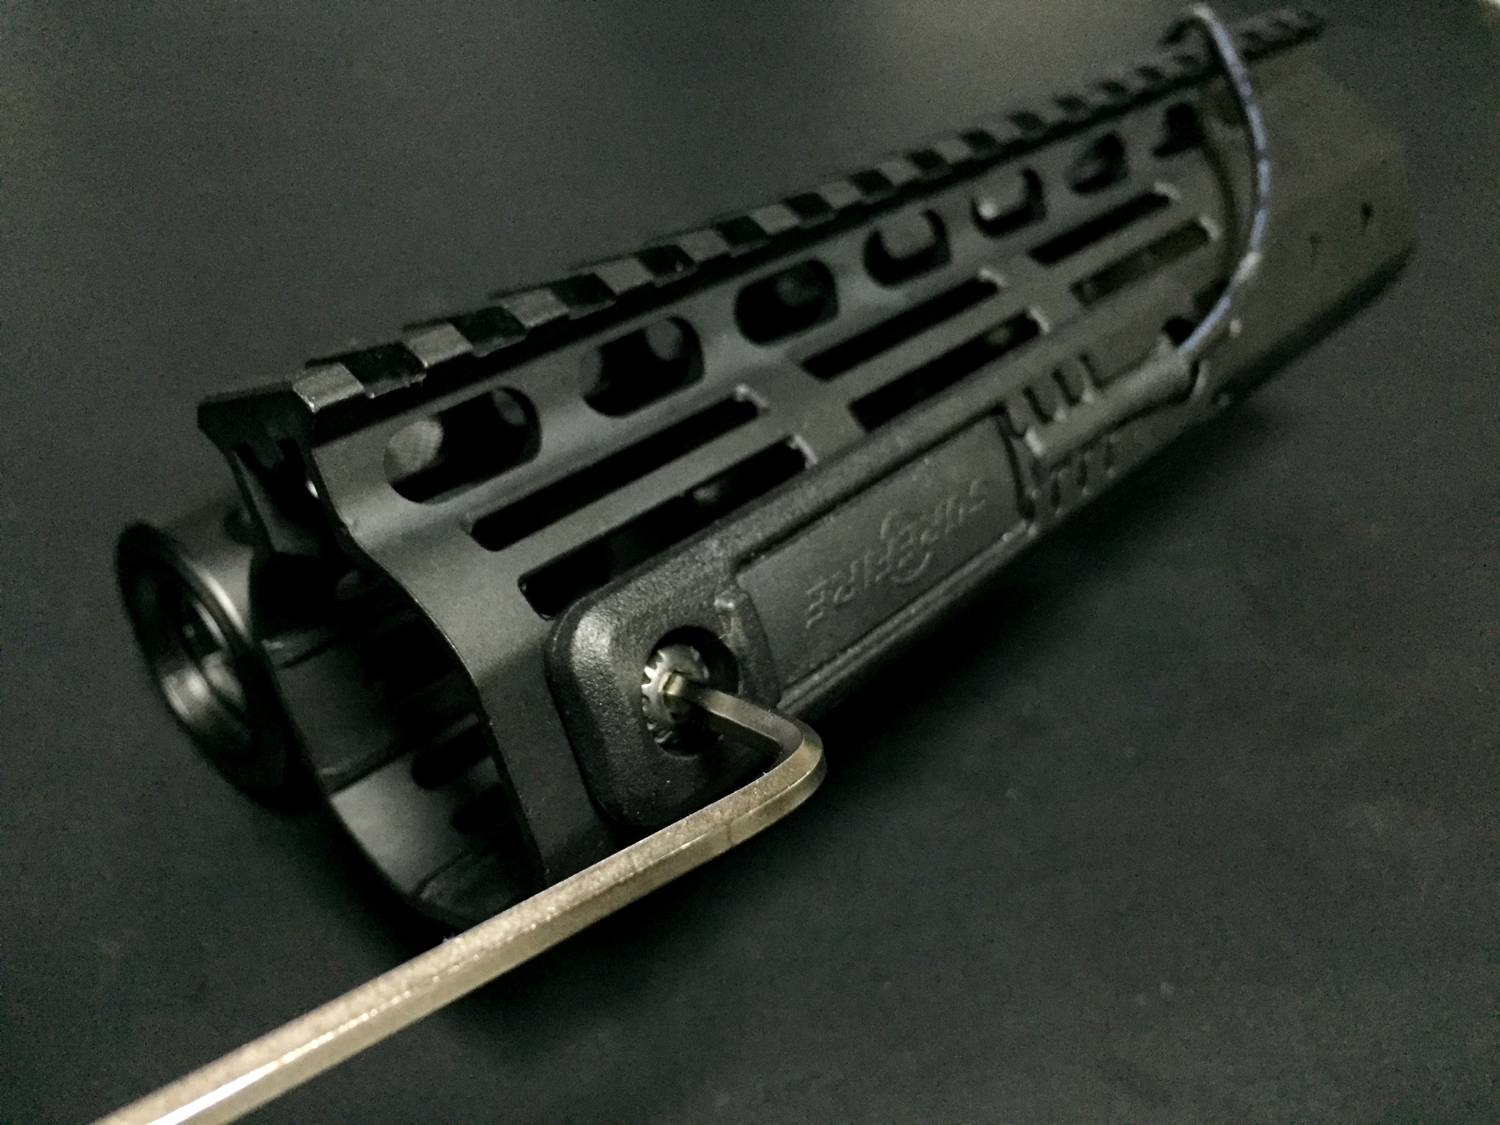 21 M-LOK MAGPUL Tape Switch Mounting Plate for Surefire ST Polymer MADE IN USA マグプル 実物 本家 テープ リモート スイッチ